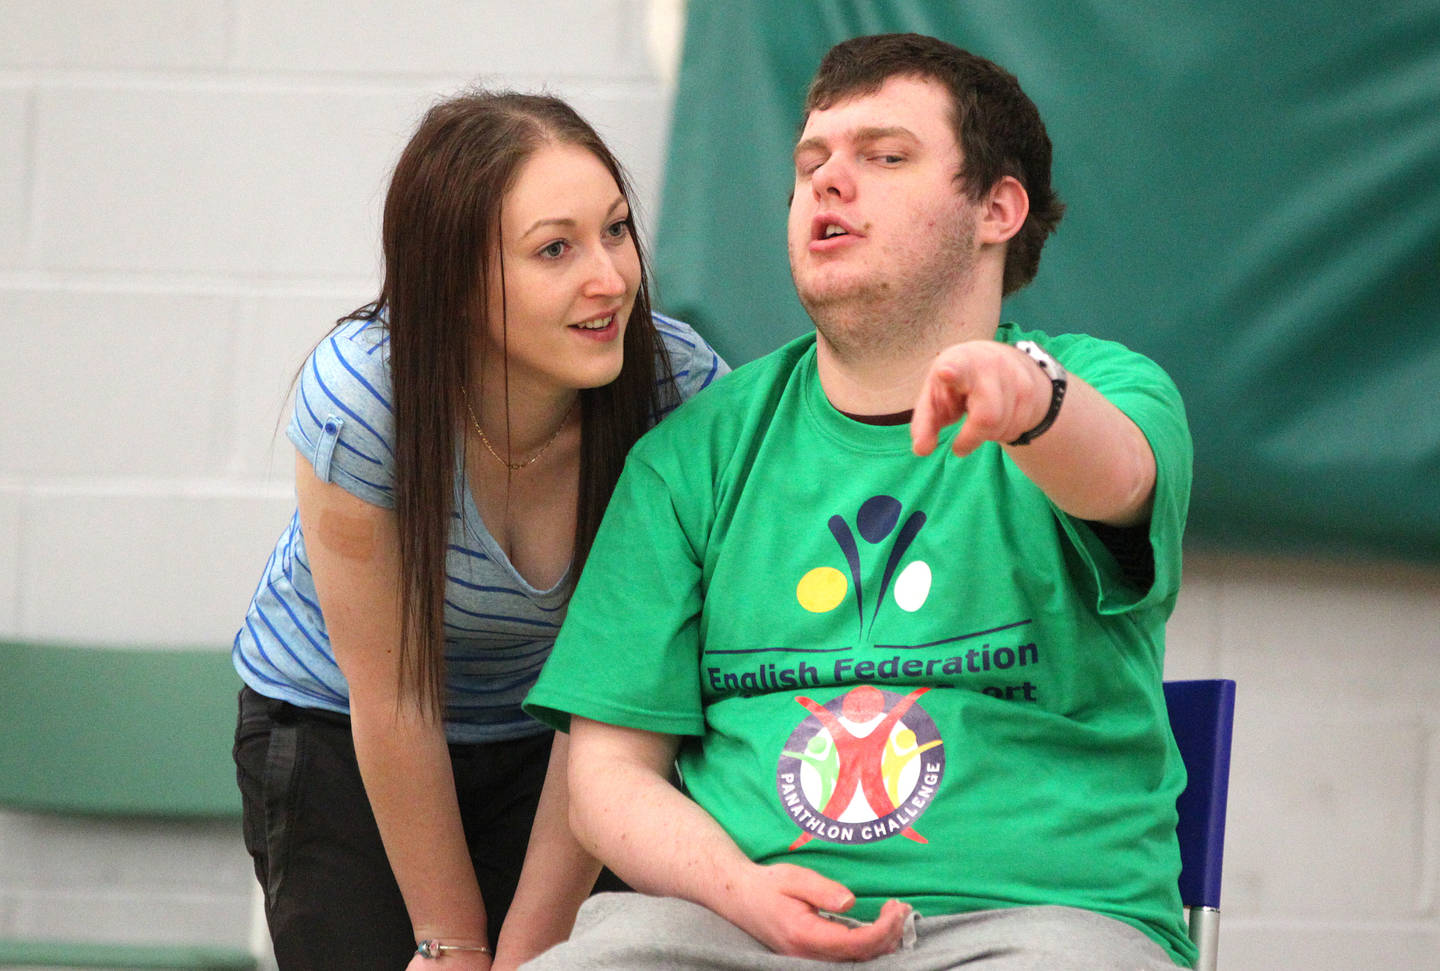 Supporter talking to a disabled child